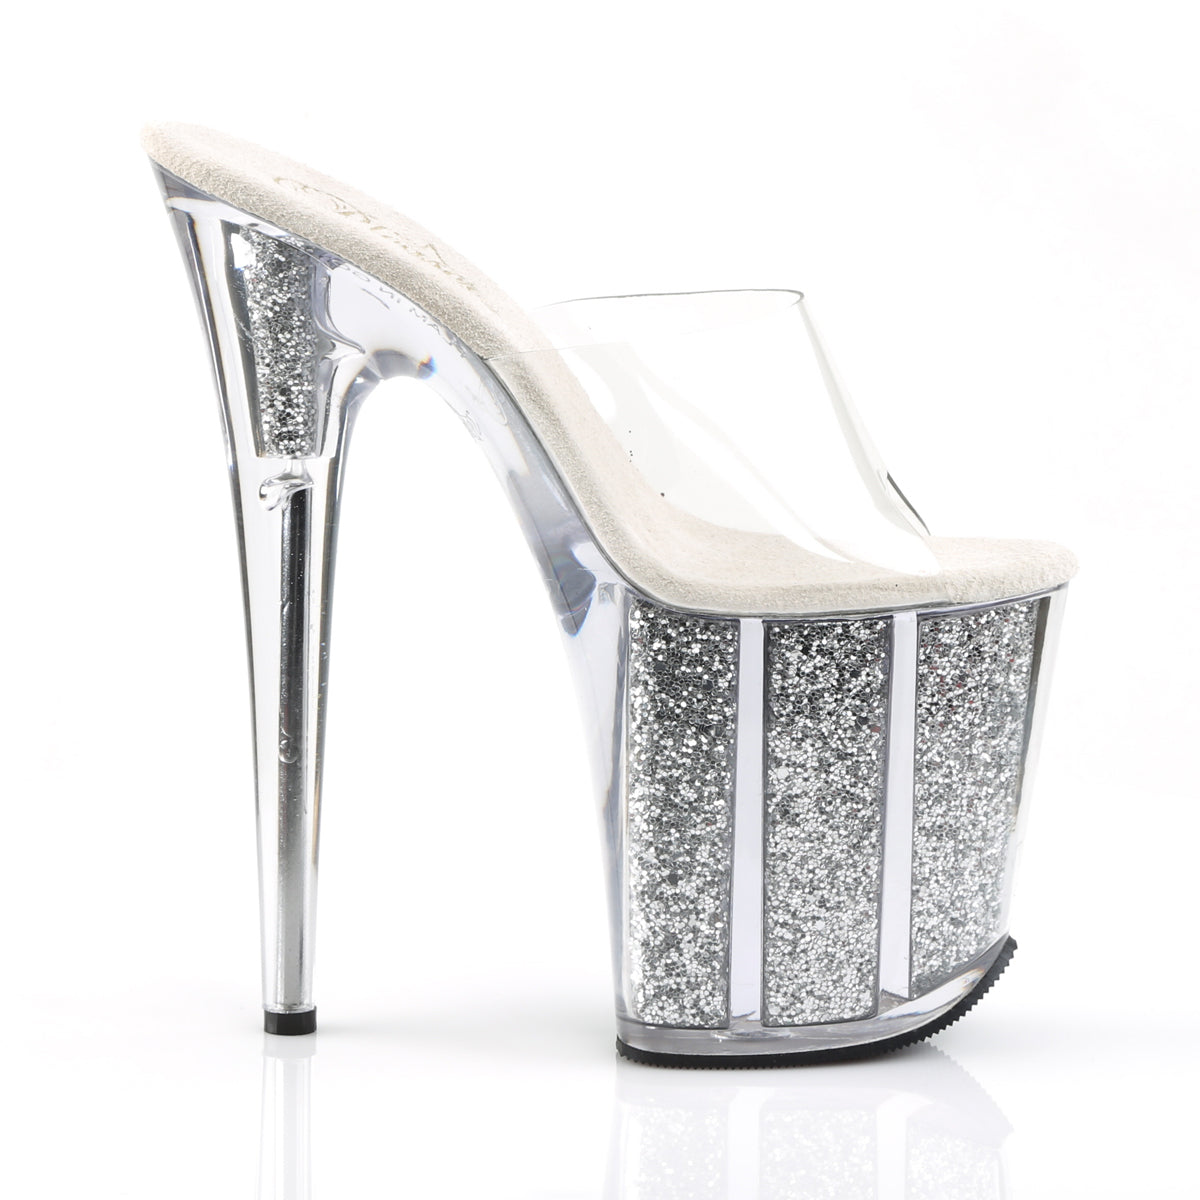 FLAMINGO-801G Pleaser Clear/Silver Glitter Platform Shoes [Exotic Dancing Shoes]